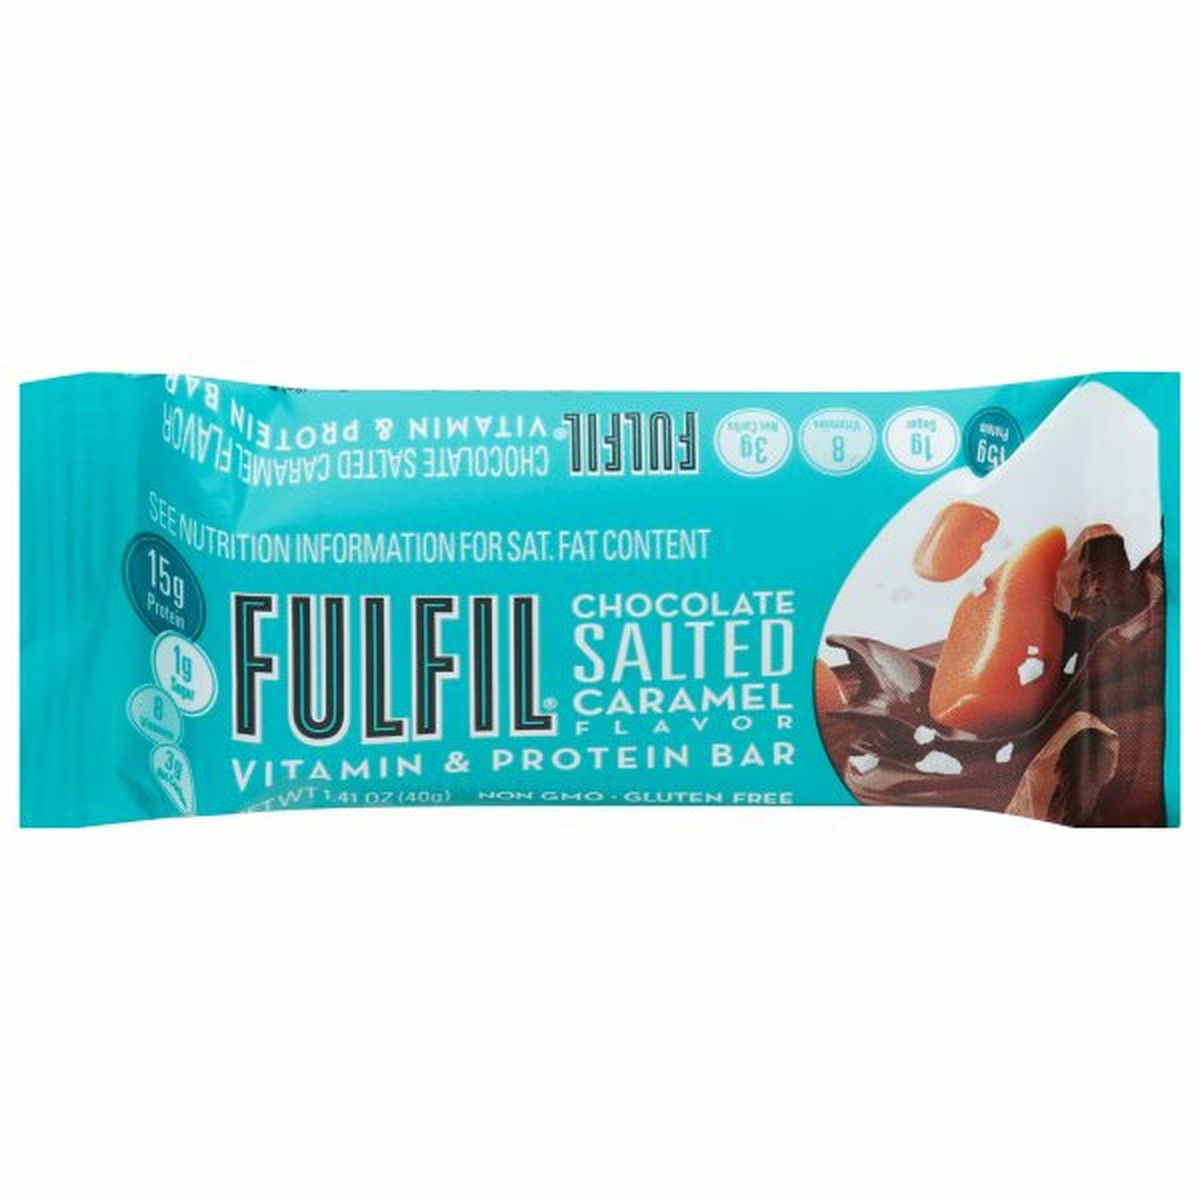 Calories in Fulfil Vitamin & Protein Bar, Chocolate Salted Caramel Flavor